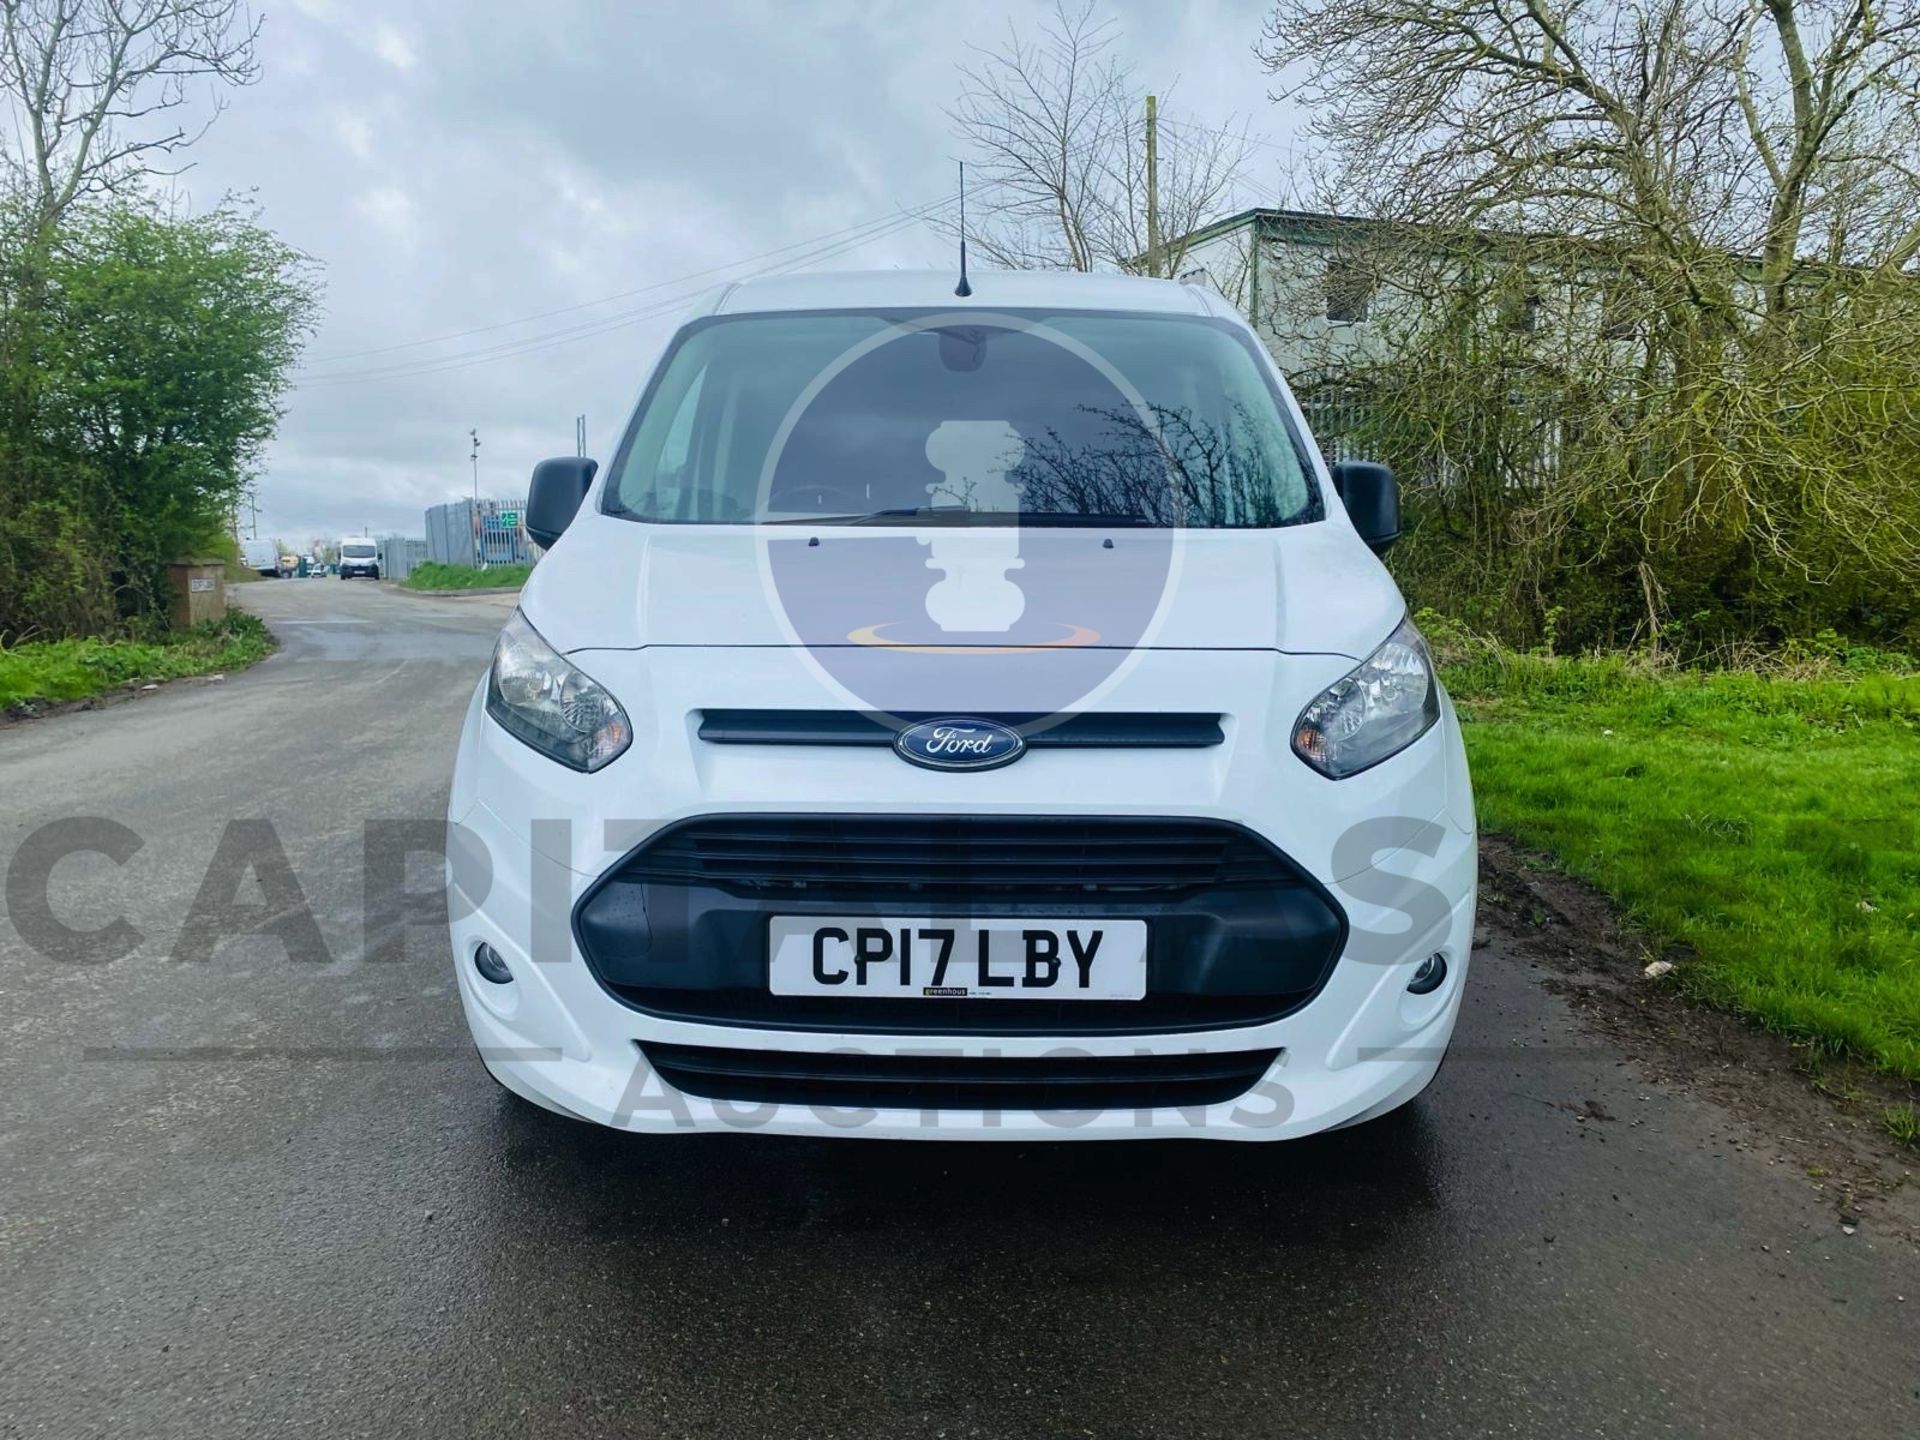 (ON SALE) FORD TRANSIT CONNECT *TREND EDITION* SWB PANEL VAN (2017 - EURO 6) 1.5 TDCI - Image 10 of 24